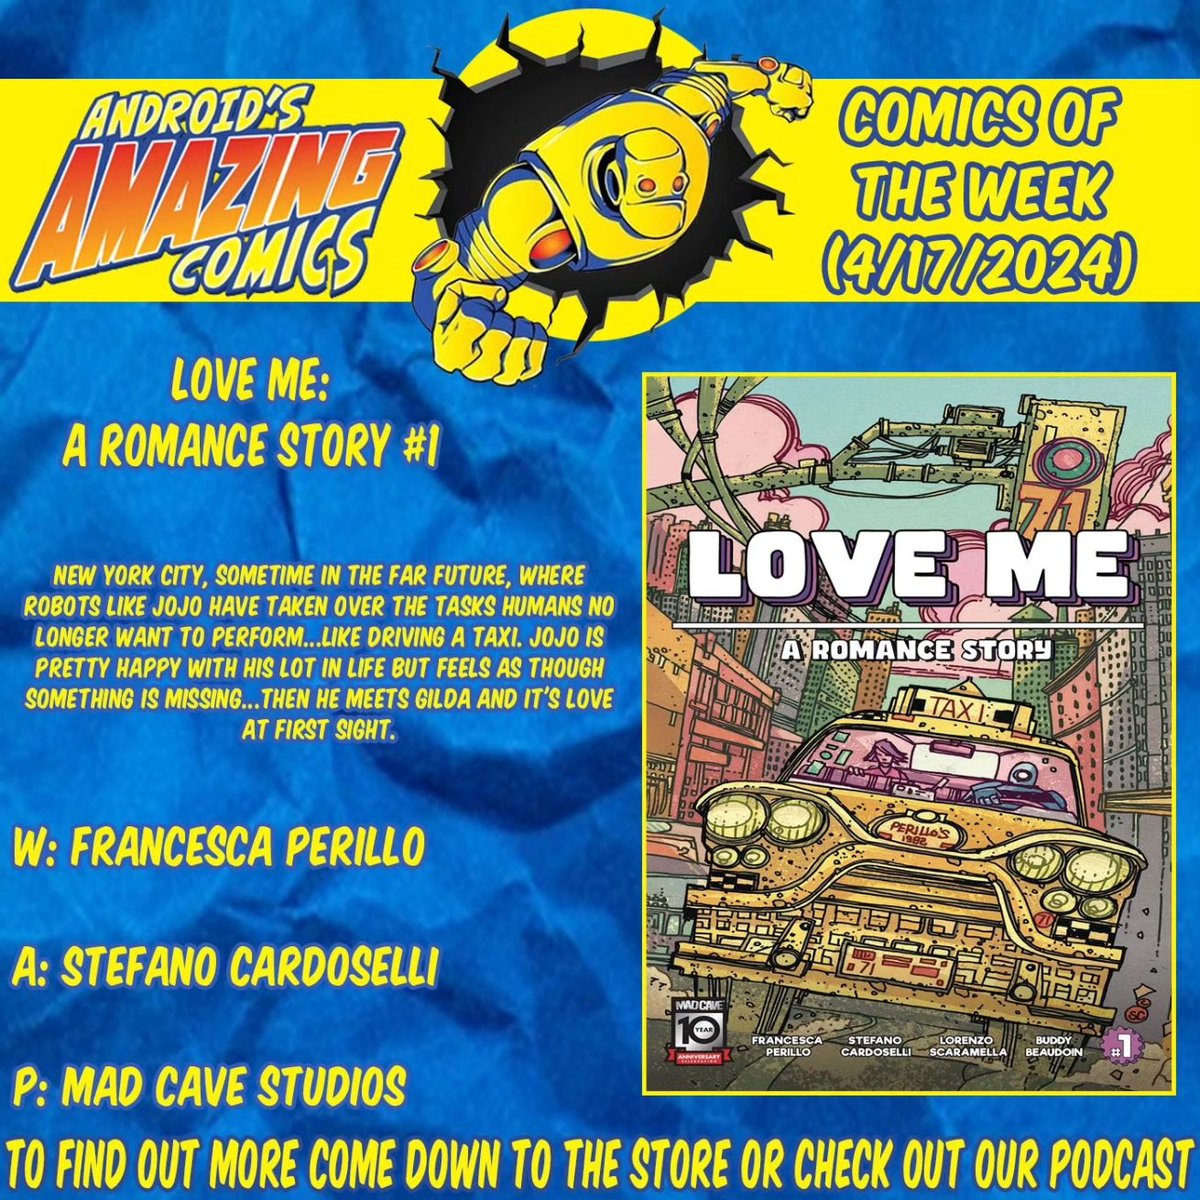 A new week means a new batch of comics! Here are our picks! 

LOVE ME
W: Francesca Perillo
A: Stefano Cardoselli
P: @MadCaveStudios

#picksoftheweek #newproduct #newinstock  #comicbooks #comics #NCBD #madcave #loveme #scifi #actioncomedy